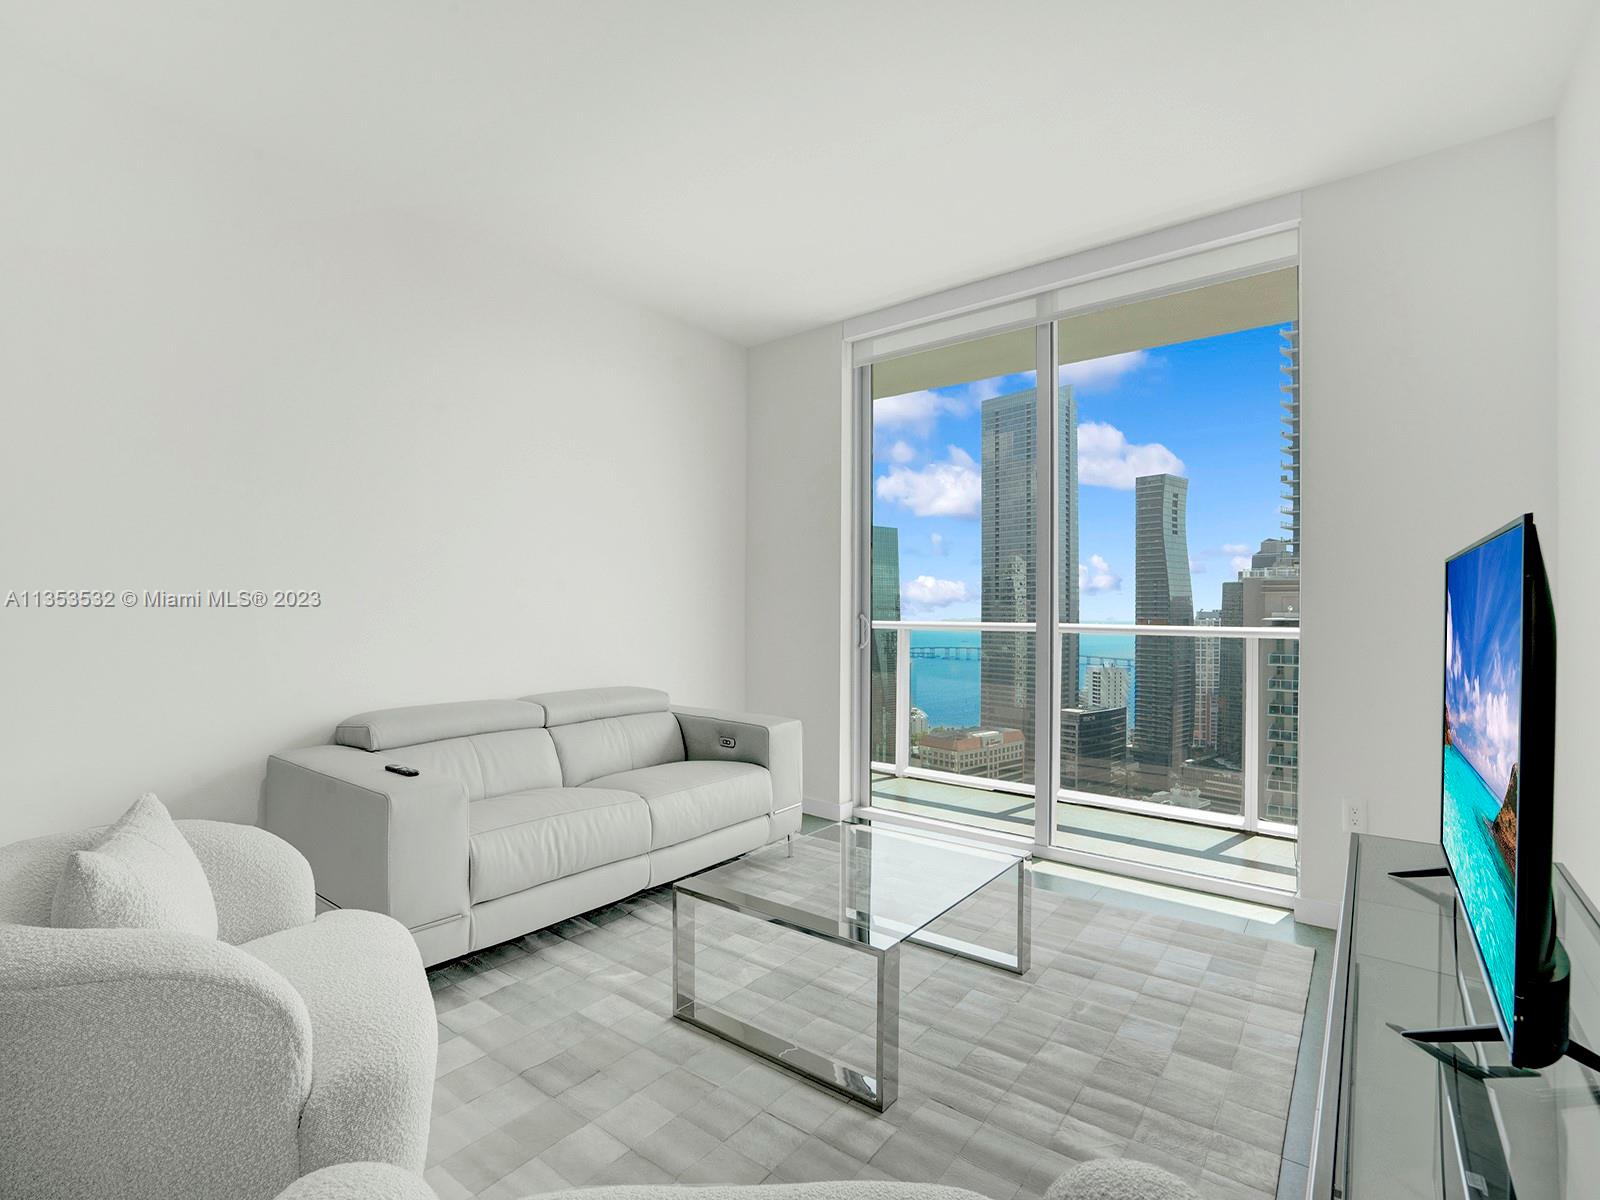 Luxury fully furnished high rise; 2 bed 2 bath unit at 37th floor in the heart of Brickell. 
Furniture is brand new. 
Resort style amenities; roof top pool, 2nd pool at 9th floor, state of art gym, lounge area, game room and much more.
Walking distance to Brickell City Center, Mary Brickell Village, shops & restaurants. 
Unit is available on or after April 15, 2023.
Seasonal rental only. Available for six months.